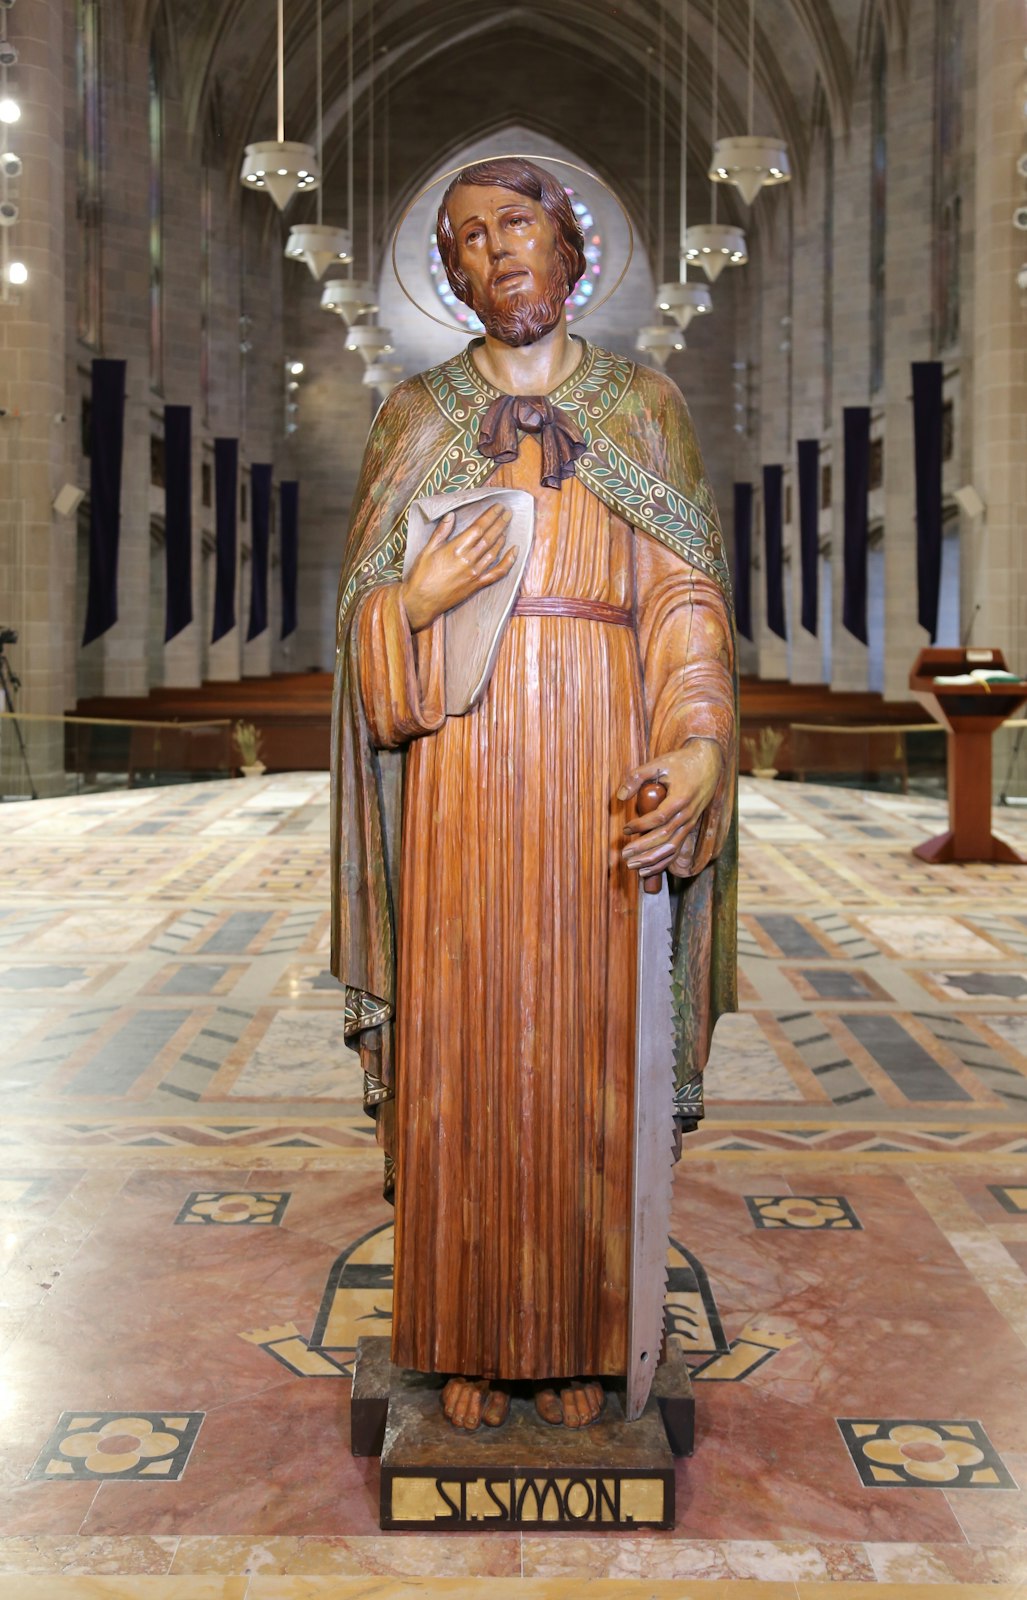 A closeup of the statue of St. Simon. The installation of the statues along with the corresponding first-class relics have transformed the cathedral into a permanent pilgrimage site.